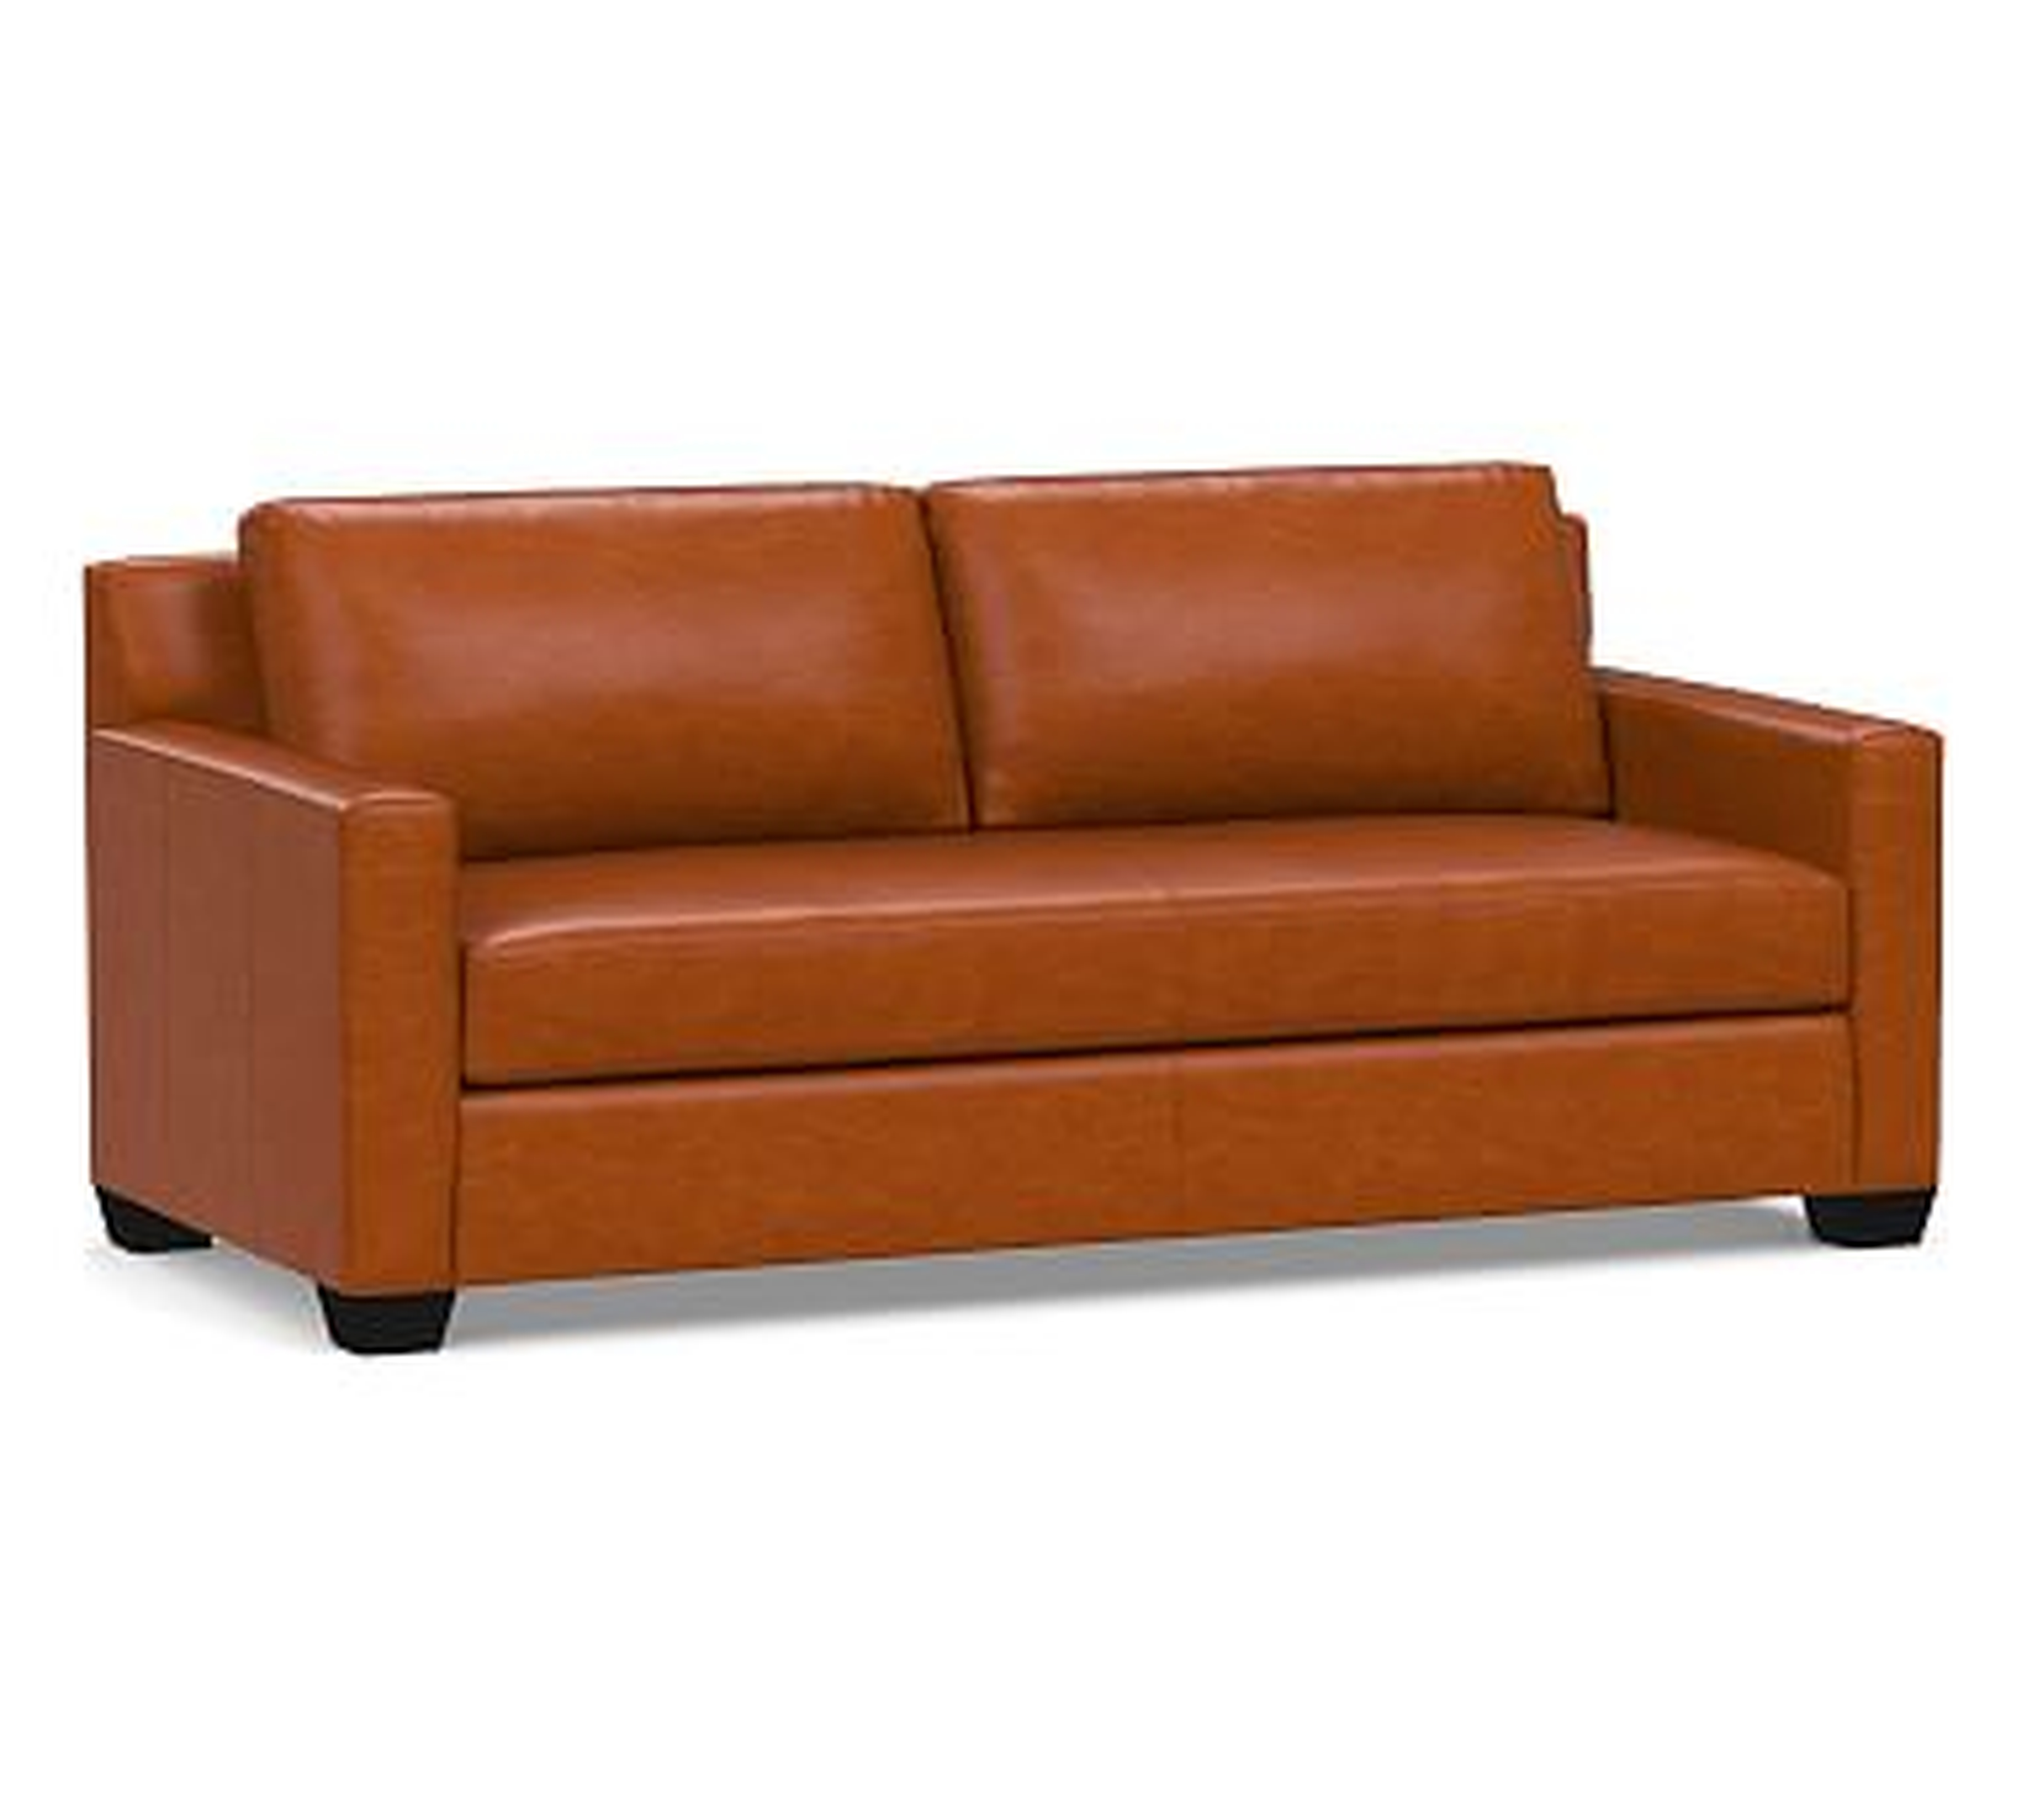 York Square Arm Leather Sofa 80" with Bench Cushion, Polyester Wrapped Cushions, Legacy Dark Caramel - Pottery Barn